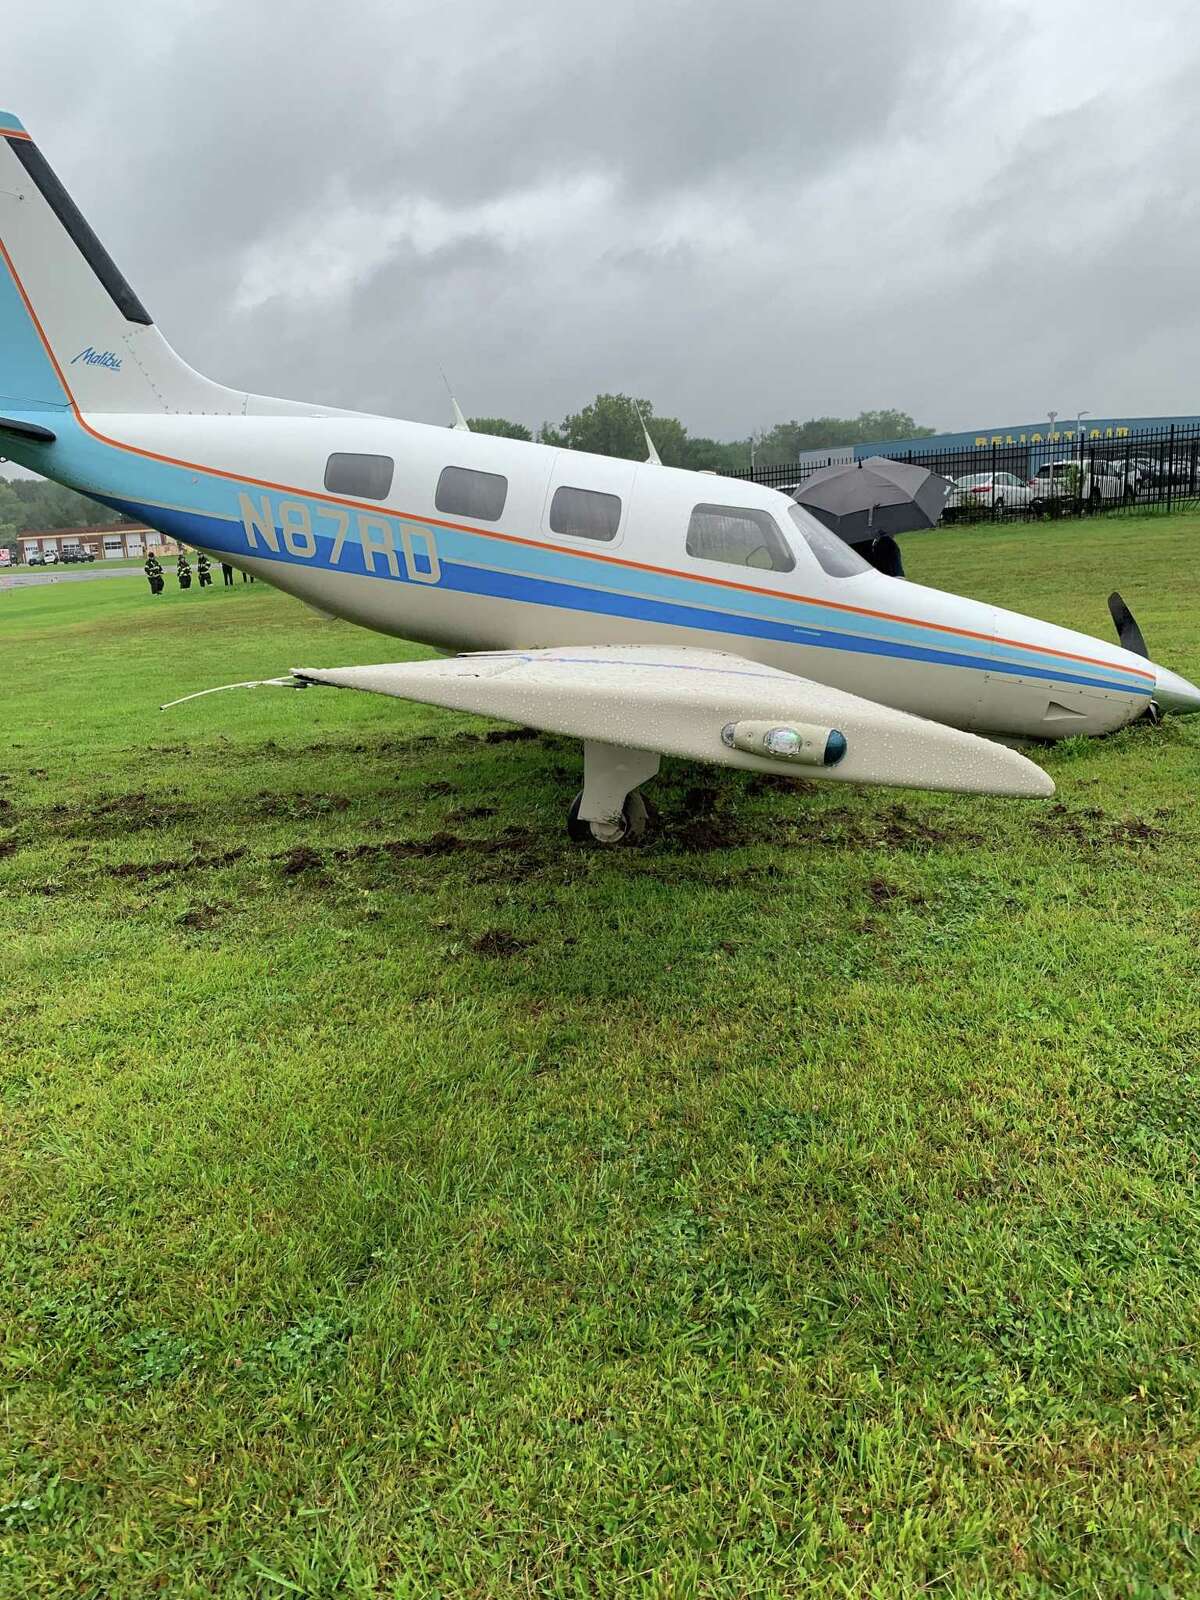 A plane coming from Maryland landed at Danbury Airport and slid 100 feet off the runway on Sunday, Sept. 5, 2021.